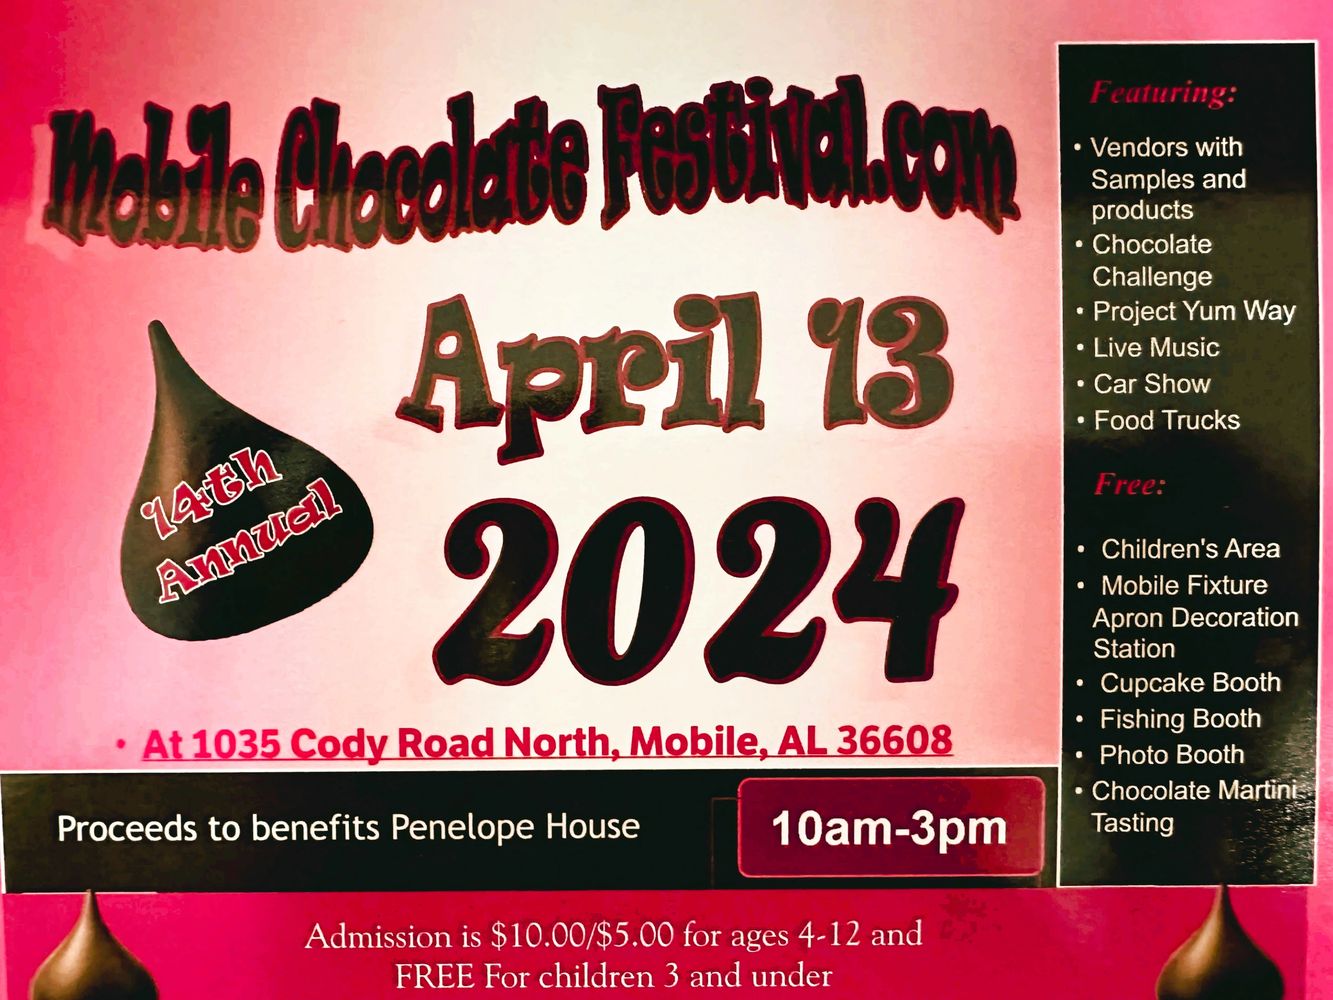 Welcome! Indulge in all that is Chocolate!
Proceeds benefit Penelope House!